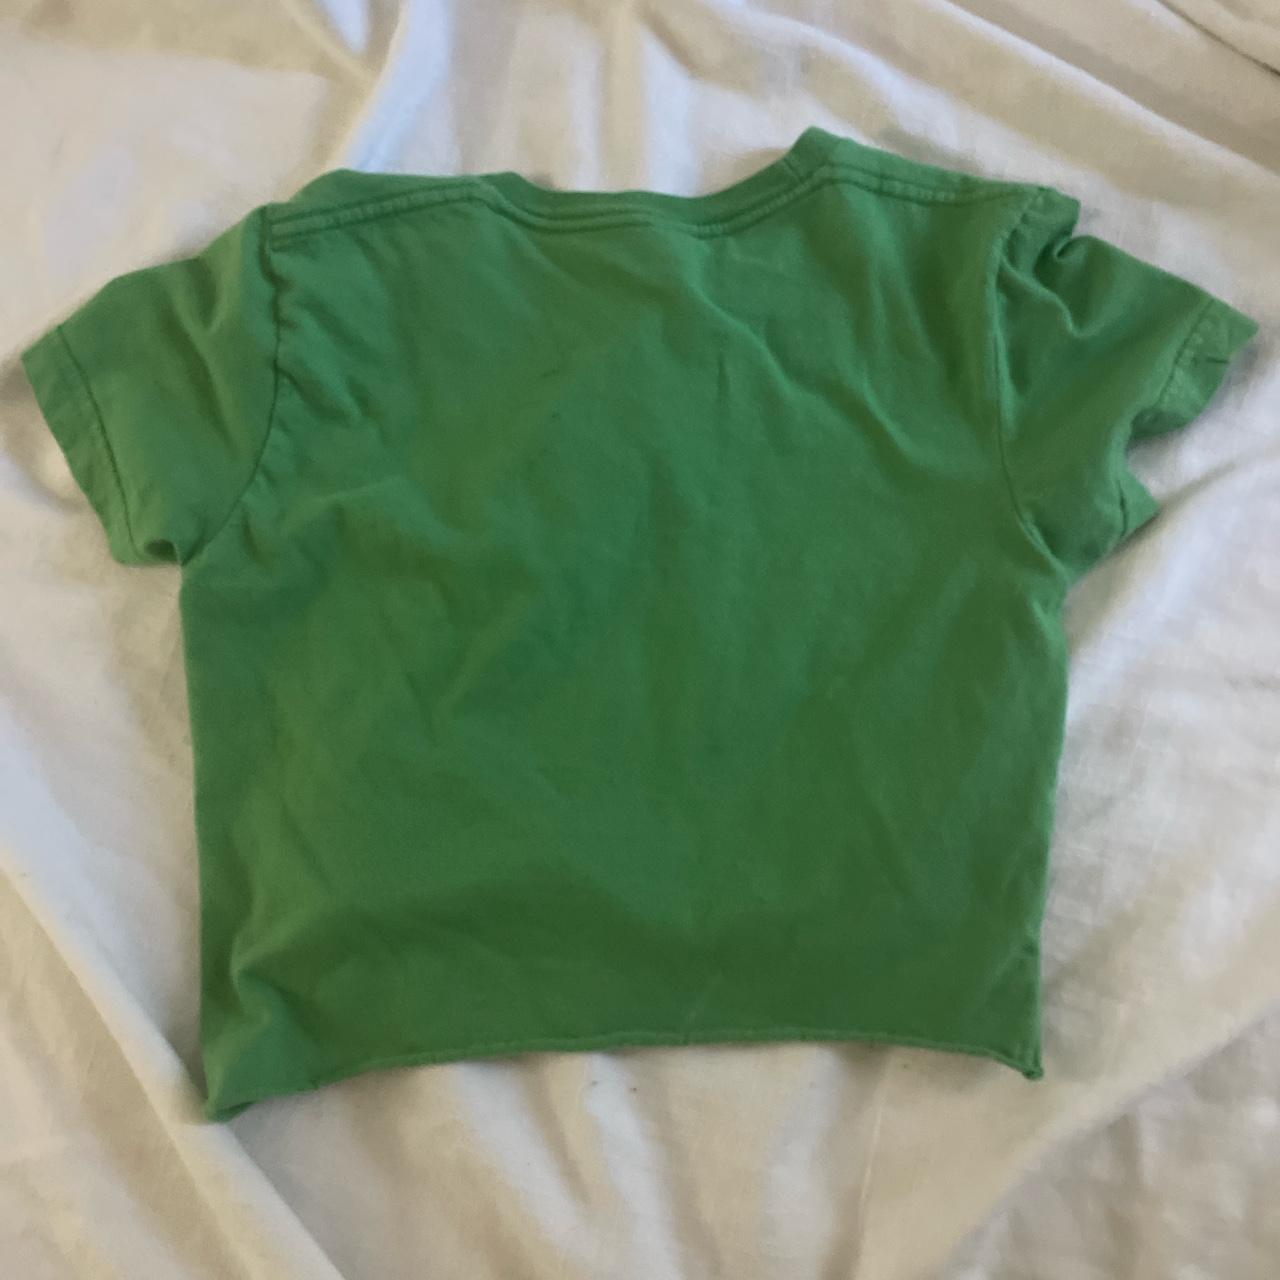 Product Image 2 - Cut-cropped green American apparel peep